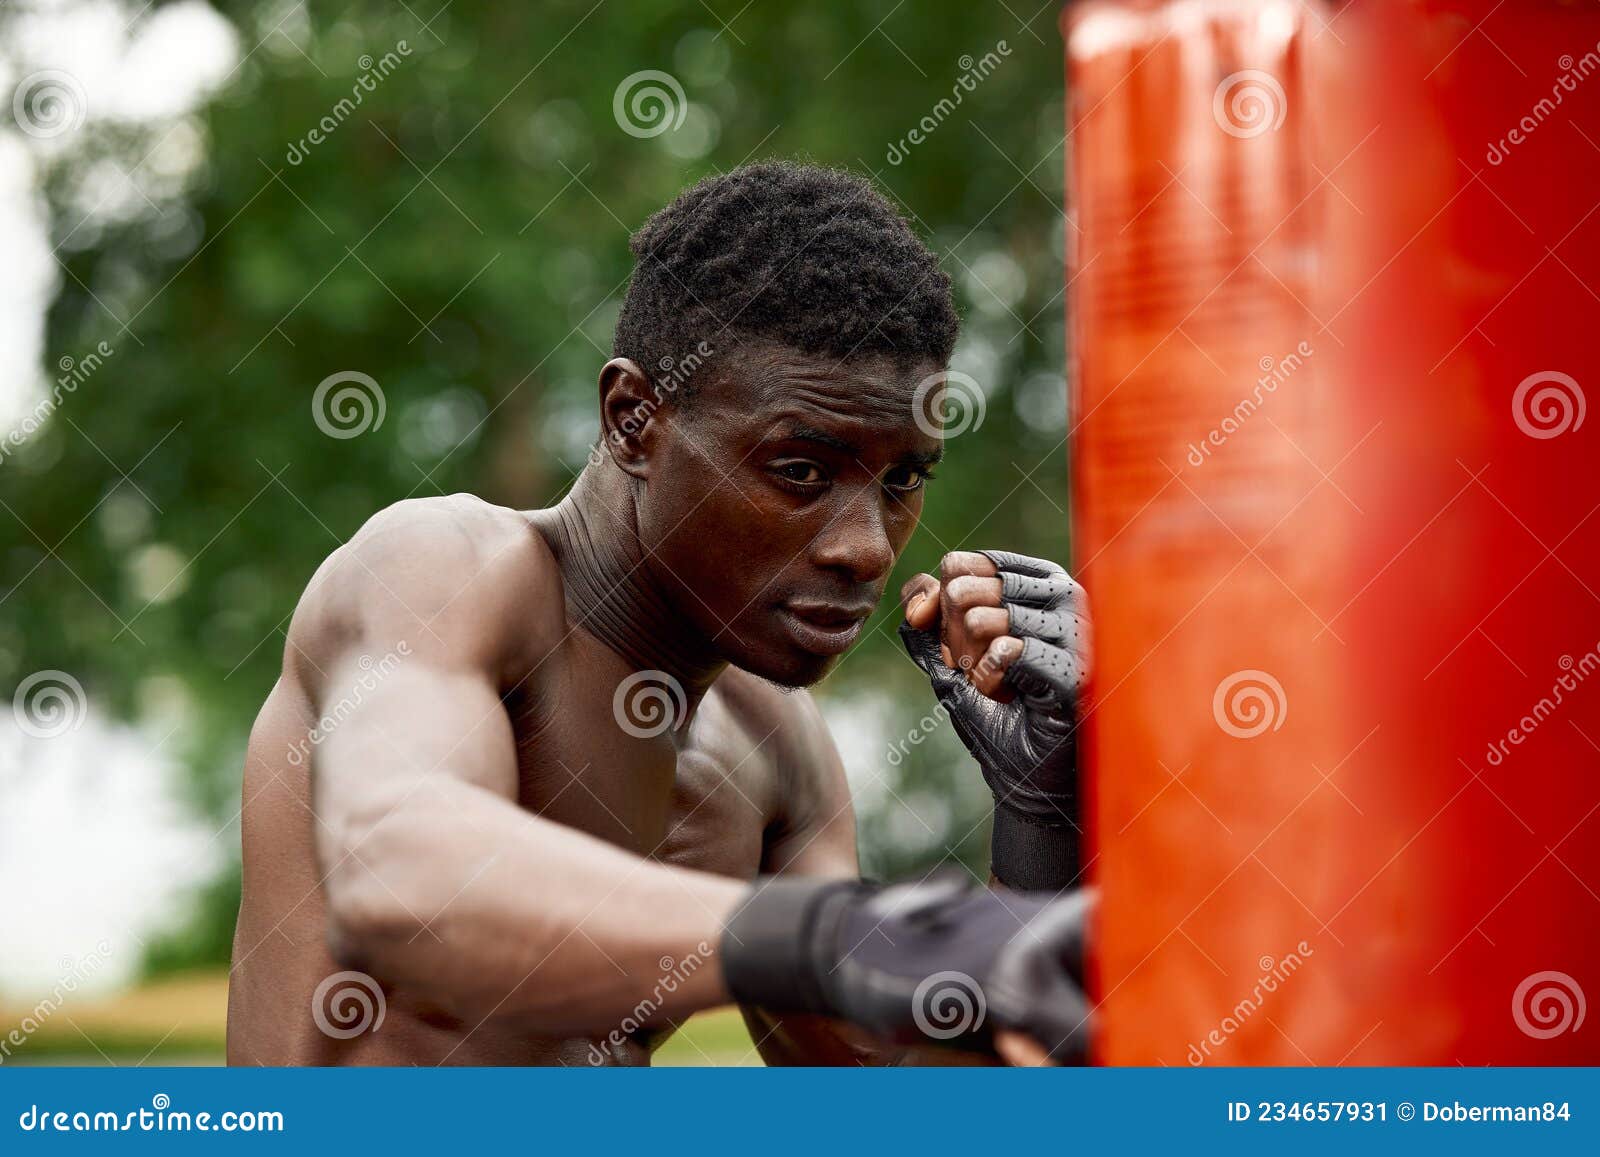 Front View of Muscular Black Boxer Punching Towards Camera with a Deep ...